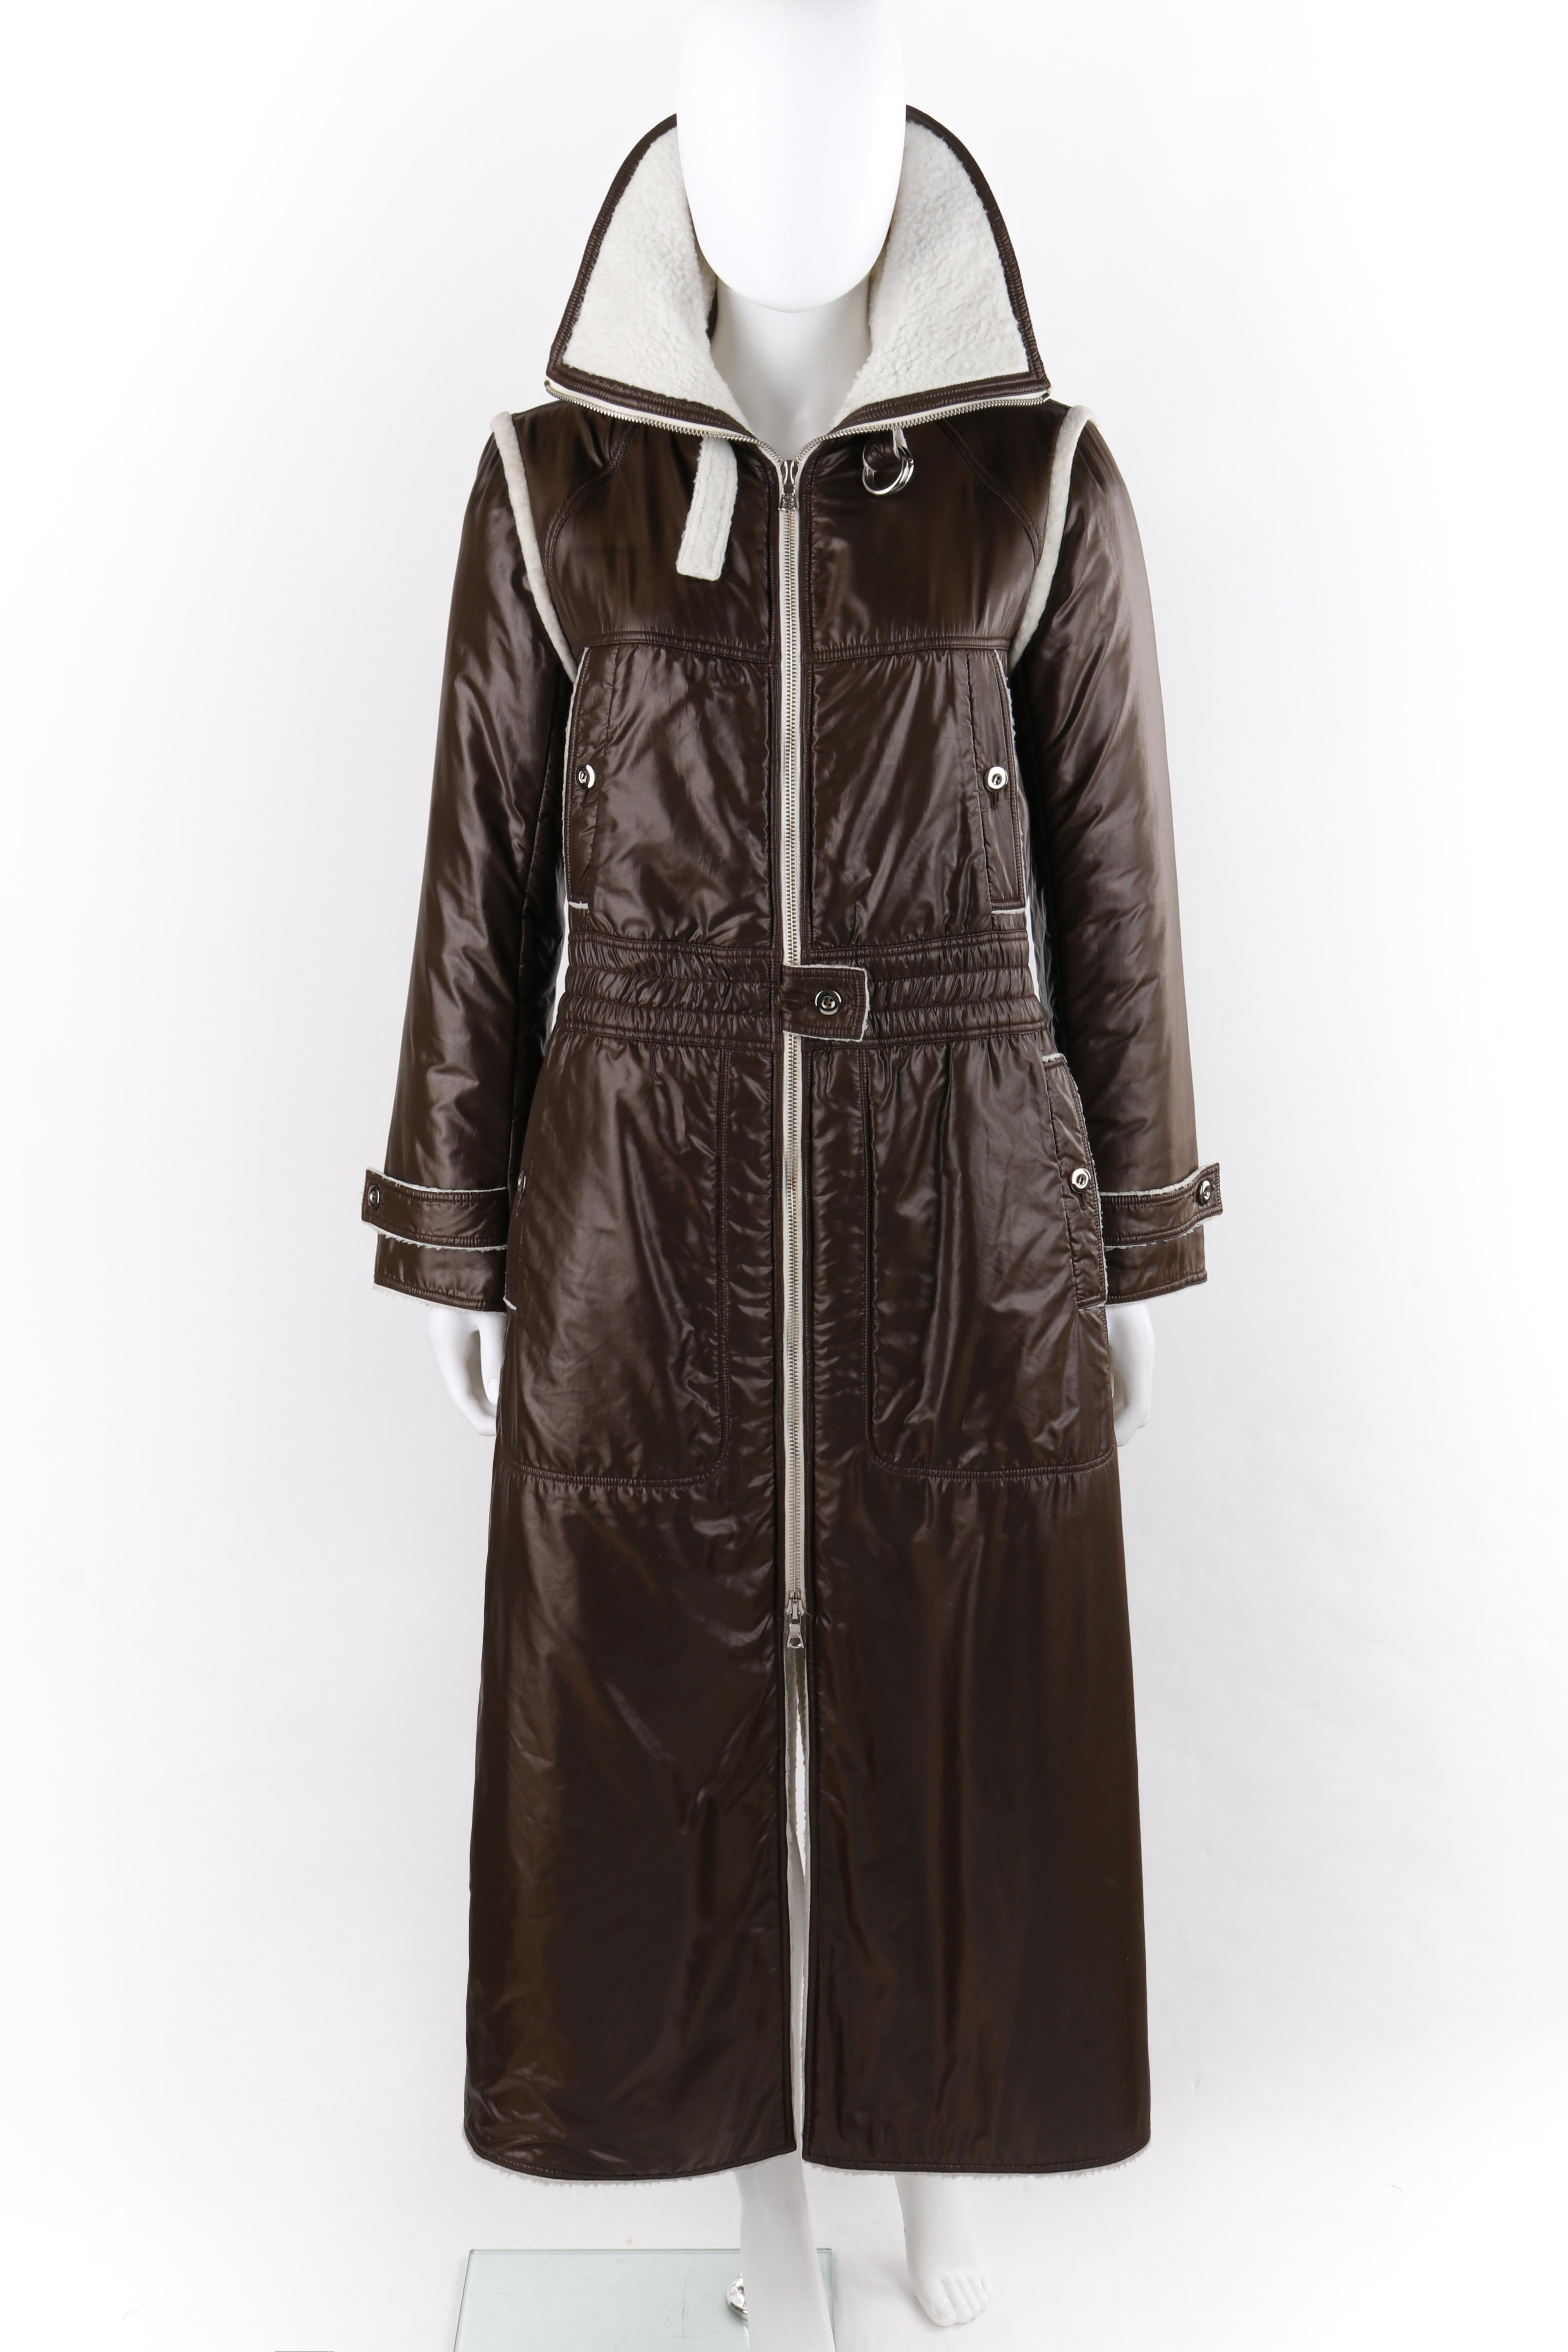 COURREGES c.1970’s Brown White High Convertible Collar Full-Length Coat Jacket
Circa: 1970s
Label(s): Courreges Paris
Designer: Andre Courreges
Style: Full-length parka style coat jacket
Color(s): Shades of brown and white
Lined: Yes
Marked Fabric